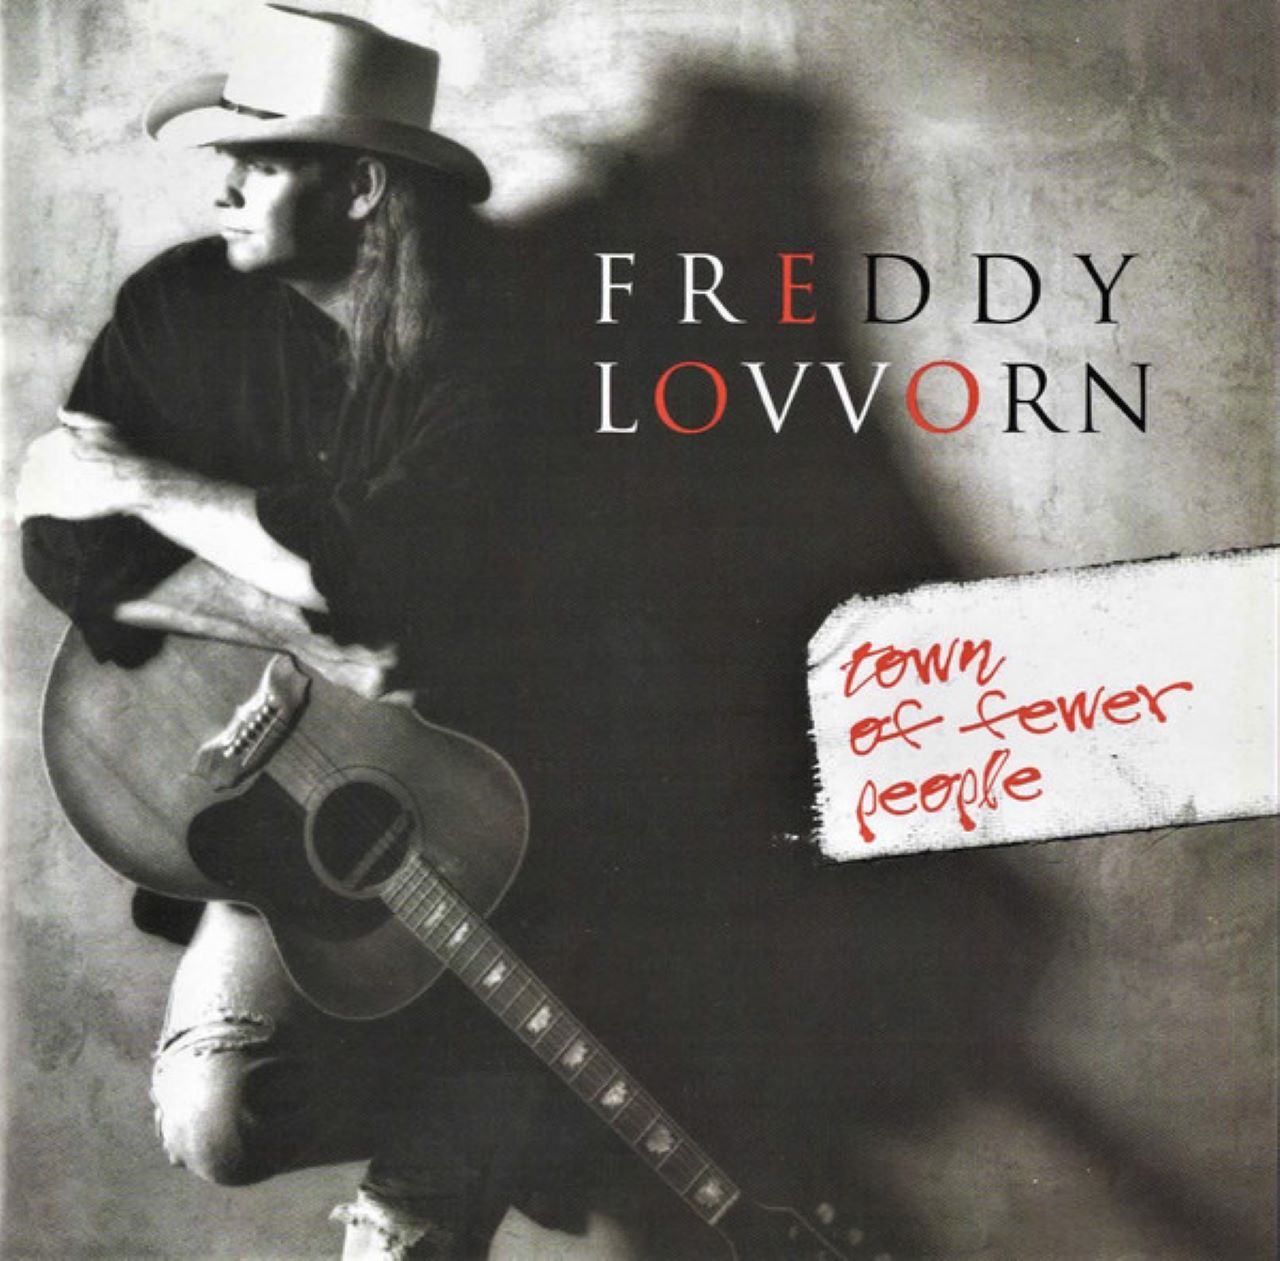 Freddy Lovvorn - Town Of Fewer People cover album